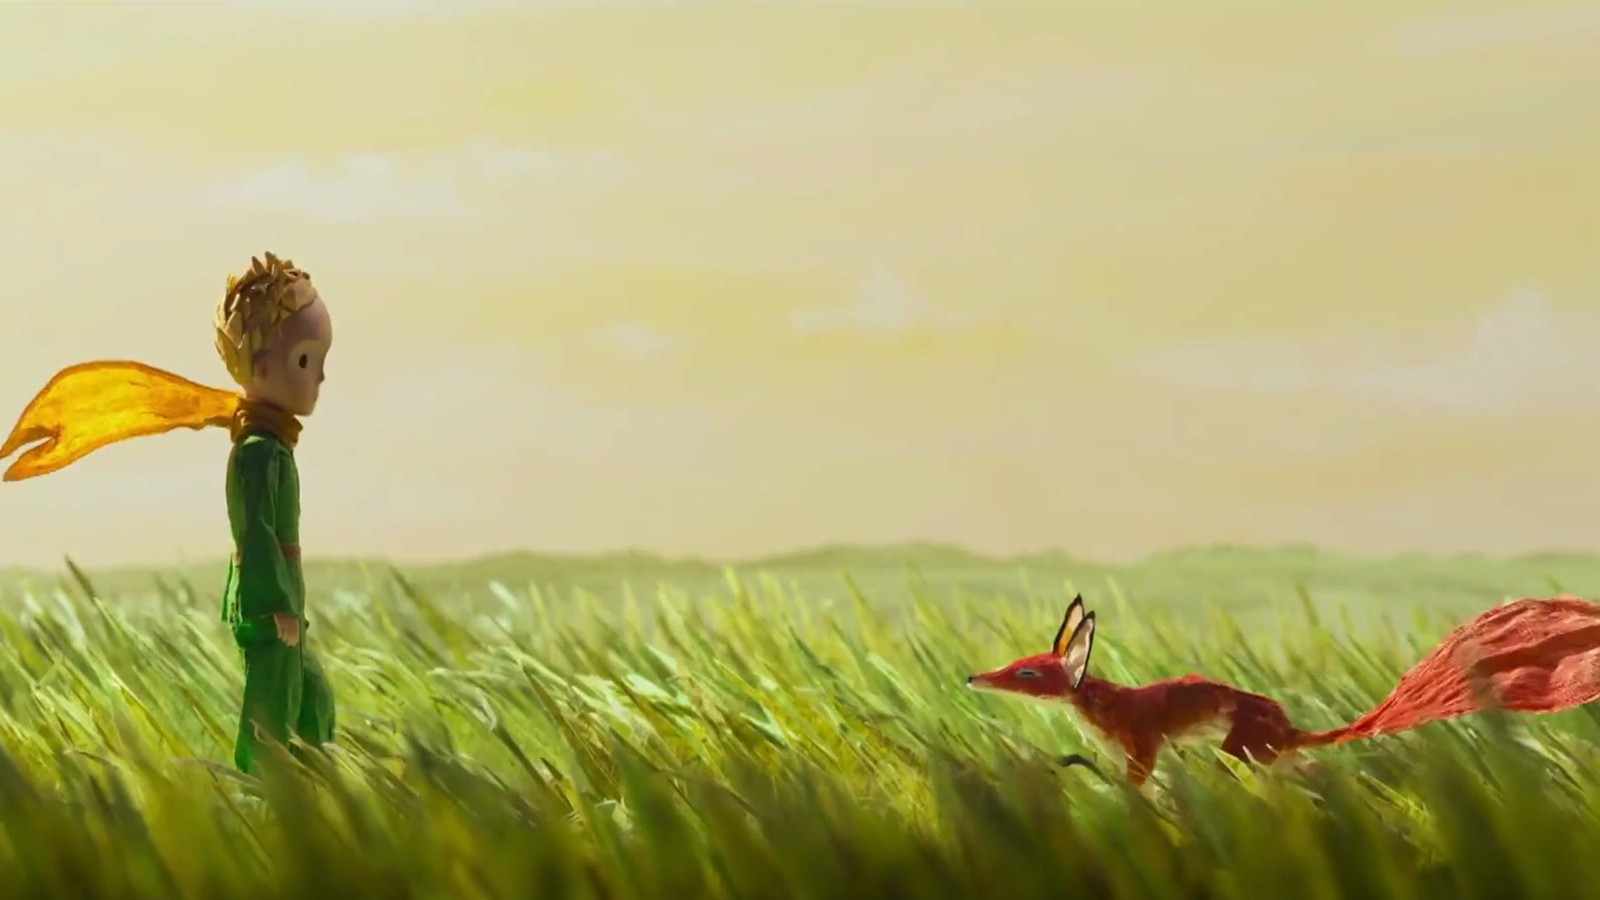 The-Little-Prince-And-Fox-Wallpapers